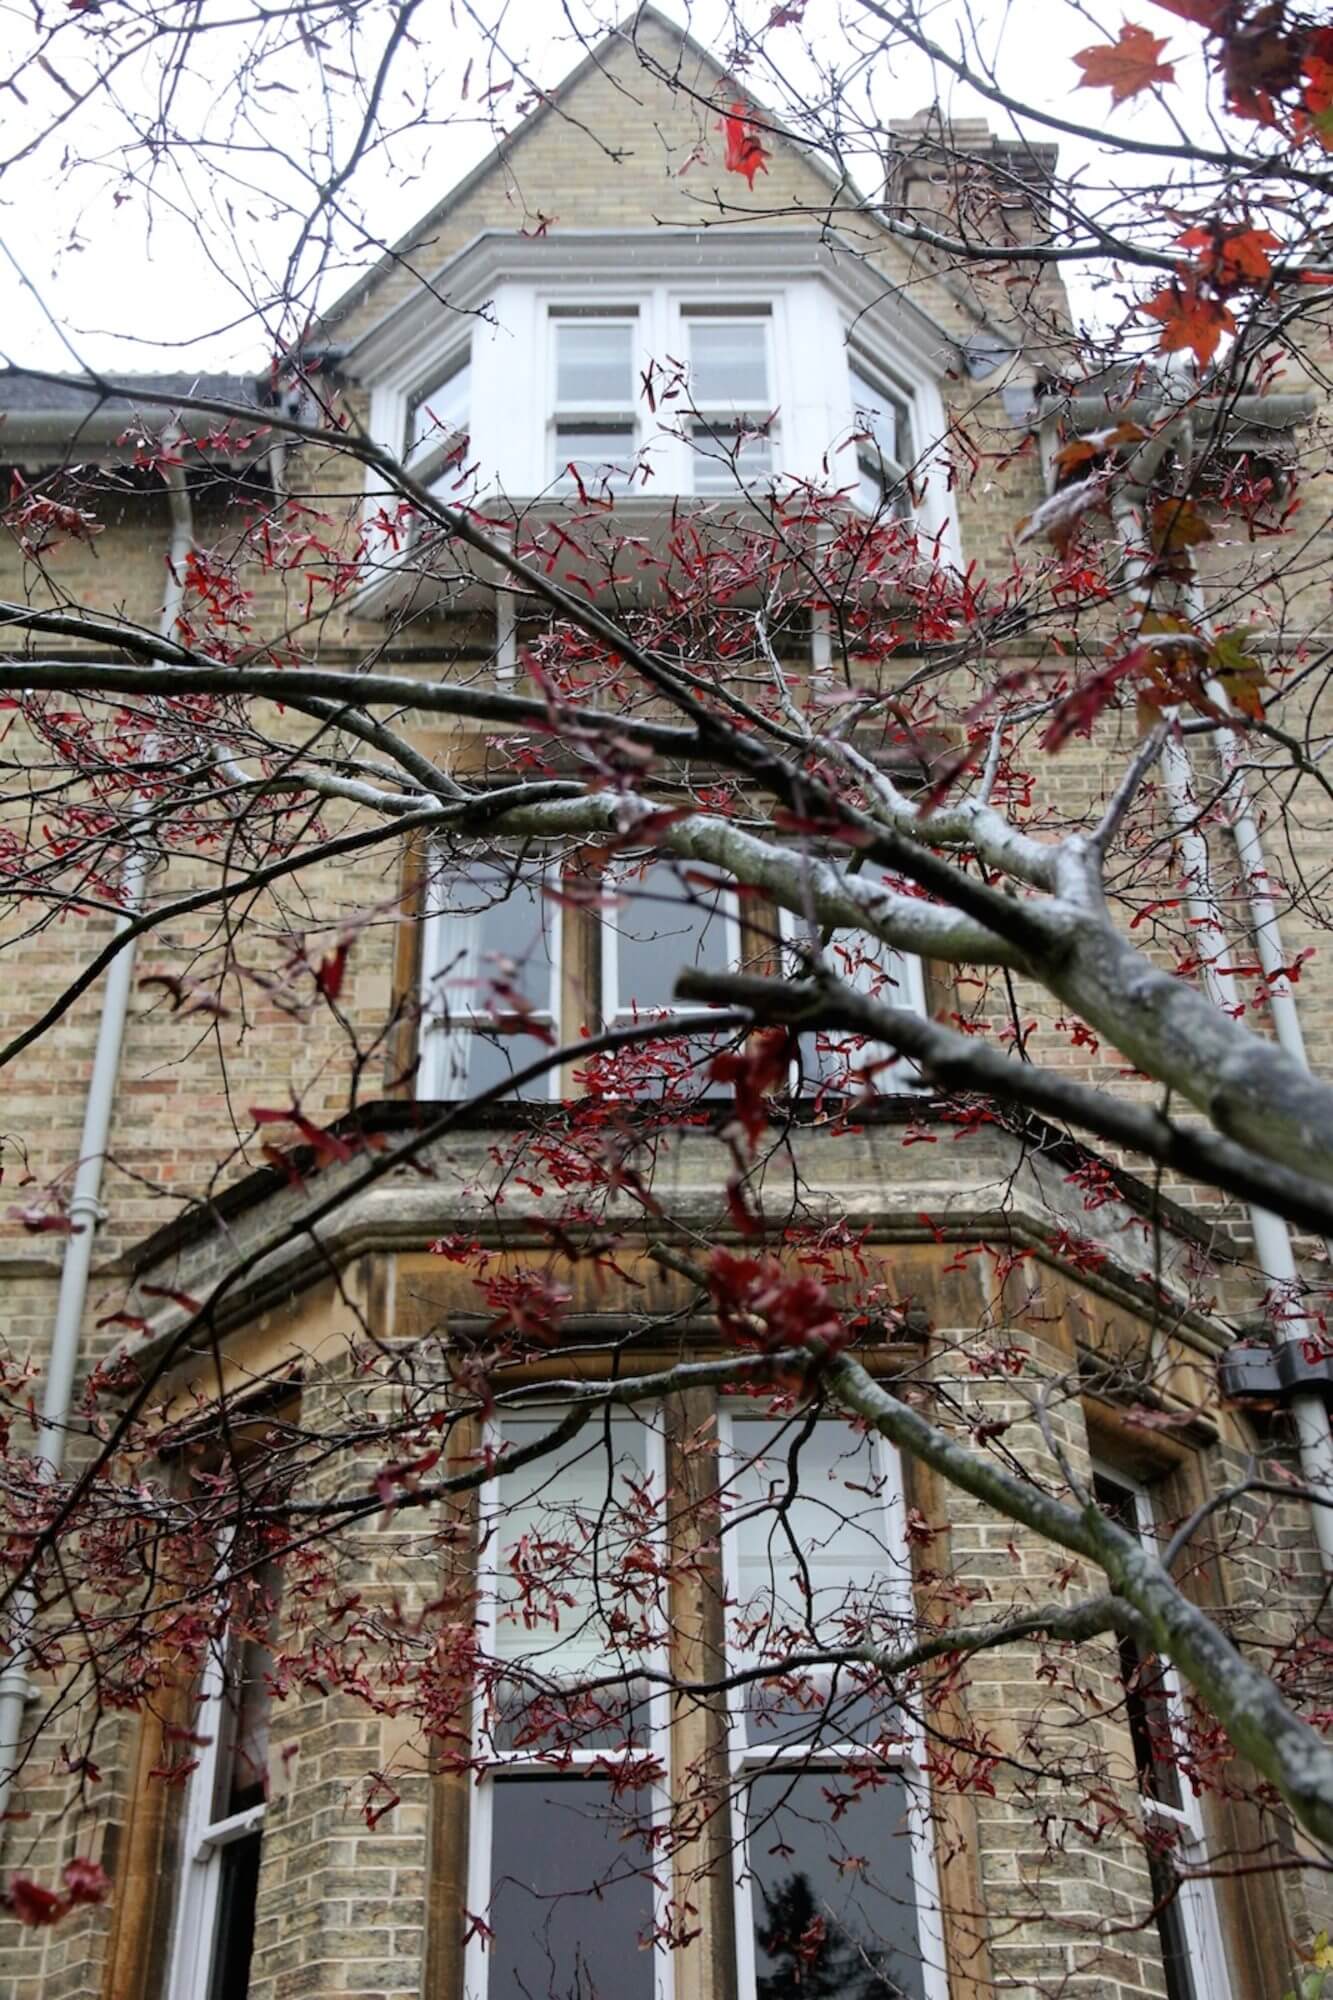 View of the front of the property showing back windows through autumnal trees